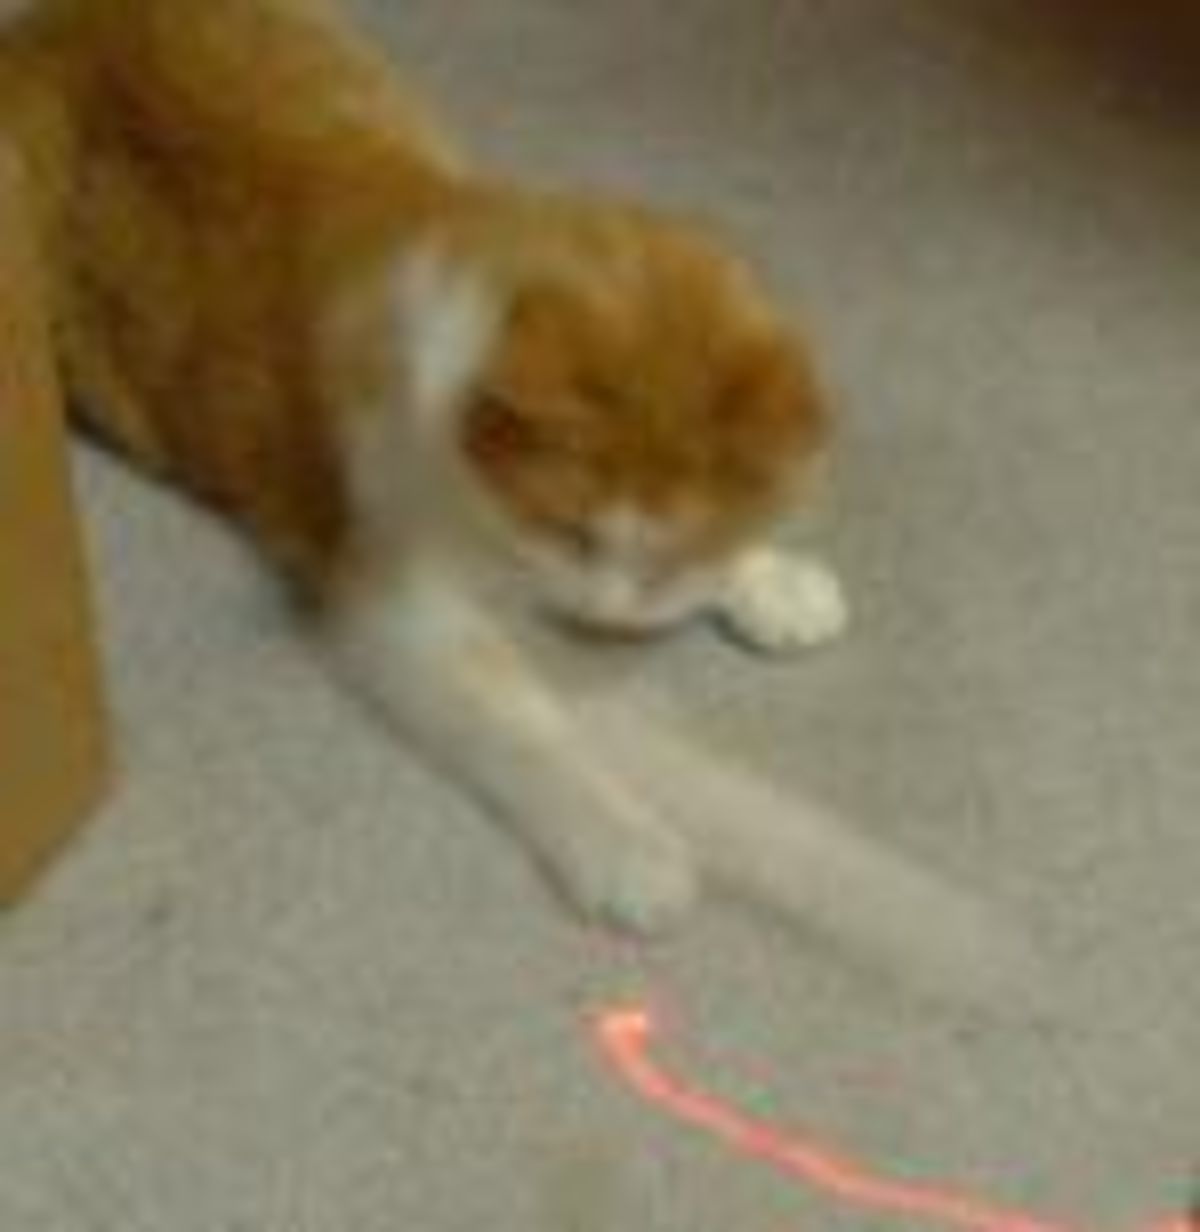 laser pens and cats